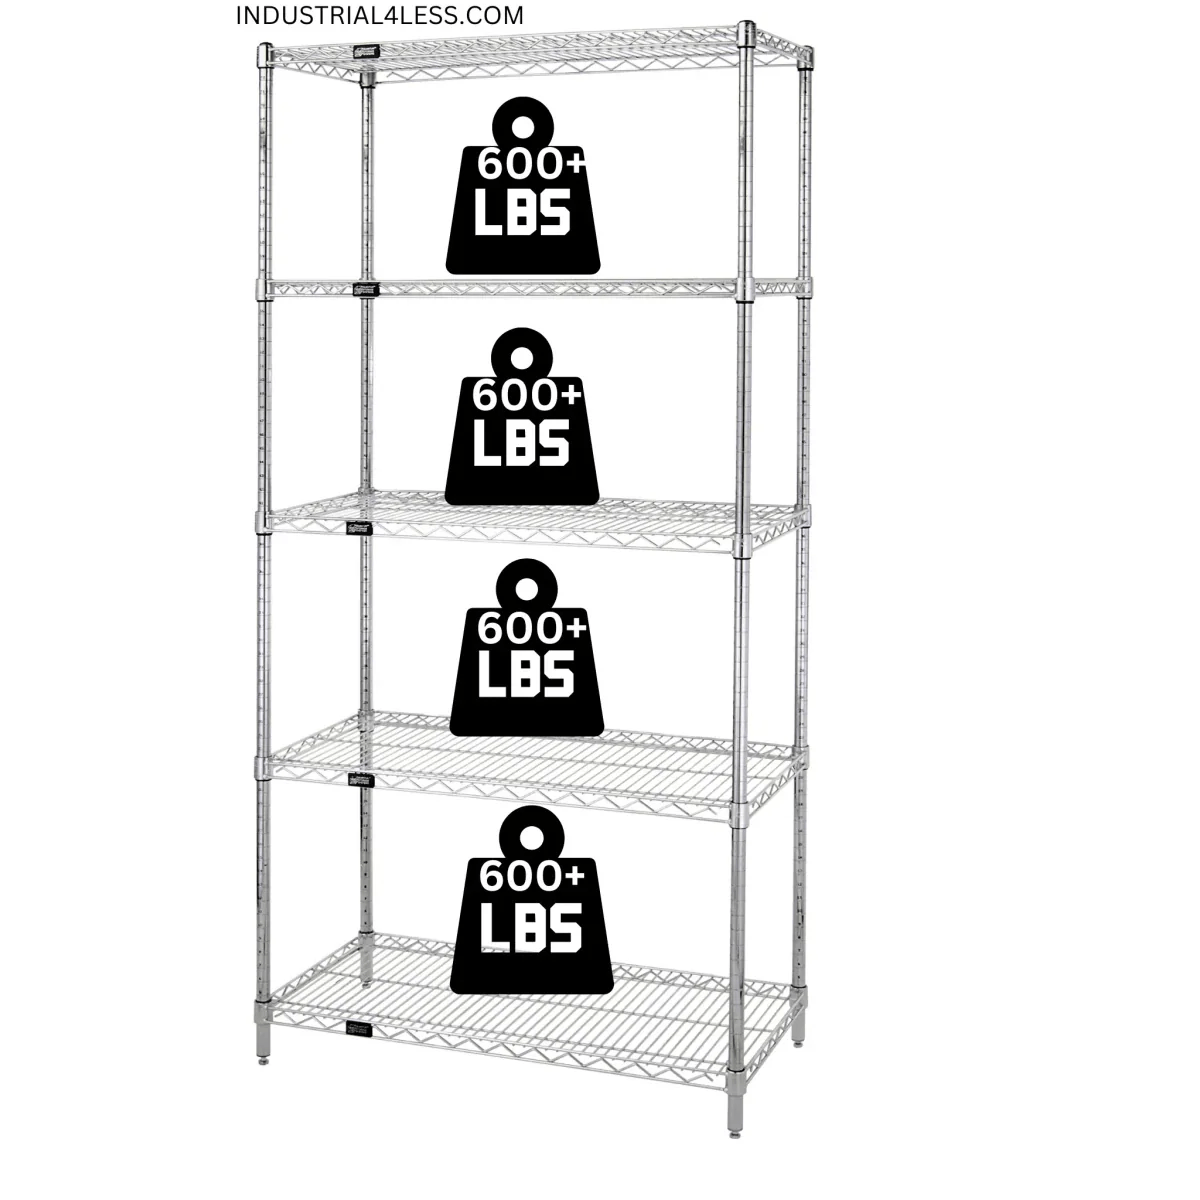 18" x 24" Stainless Steel Wire Shelving Unit - Industrial 4 Less - 18245S-5